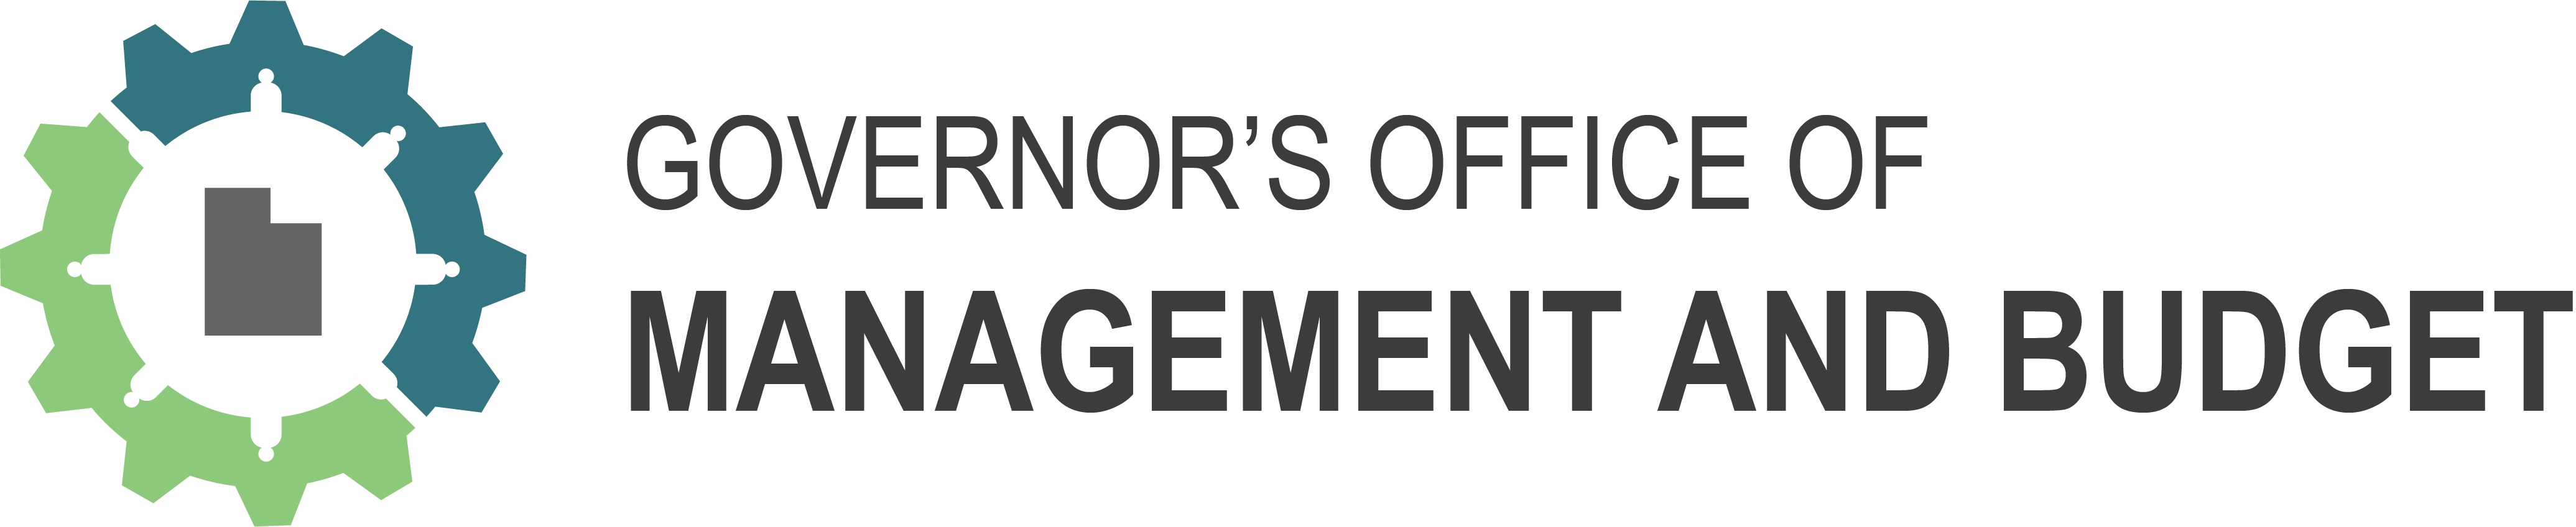 Governor's Office Of Management And Budget - Utah Governor's Office Of Management And Budget, Hd Png Download